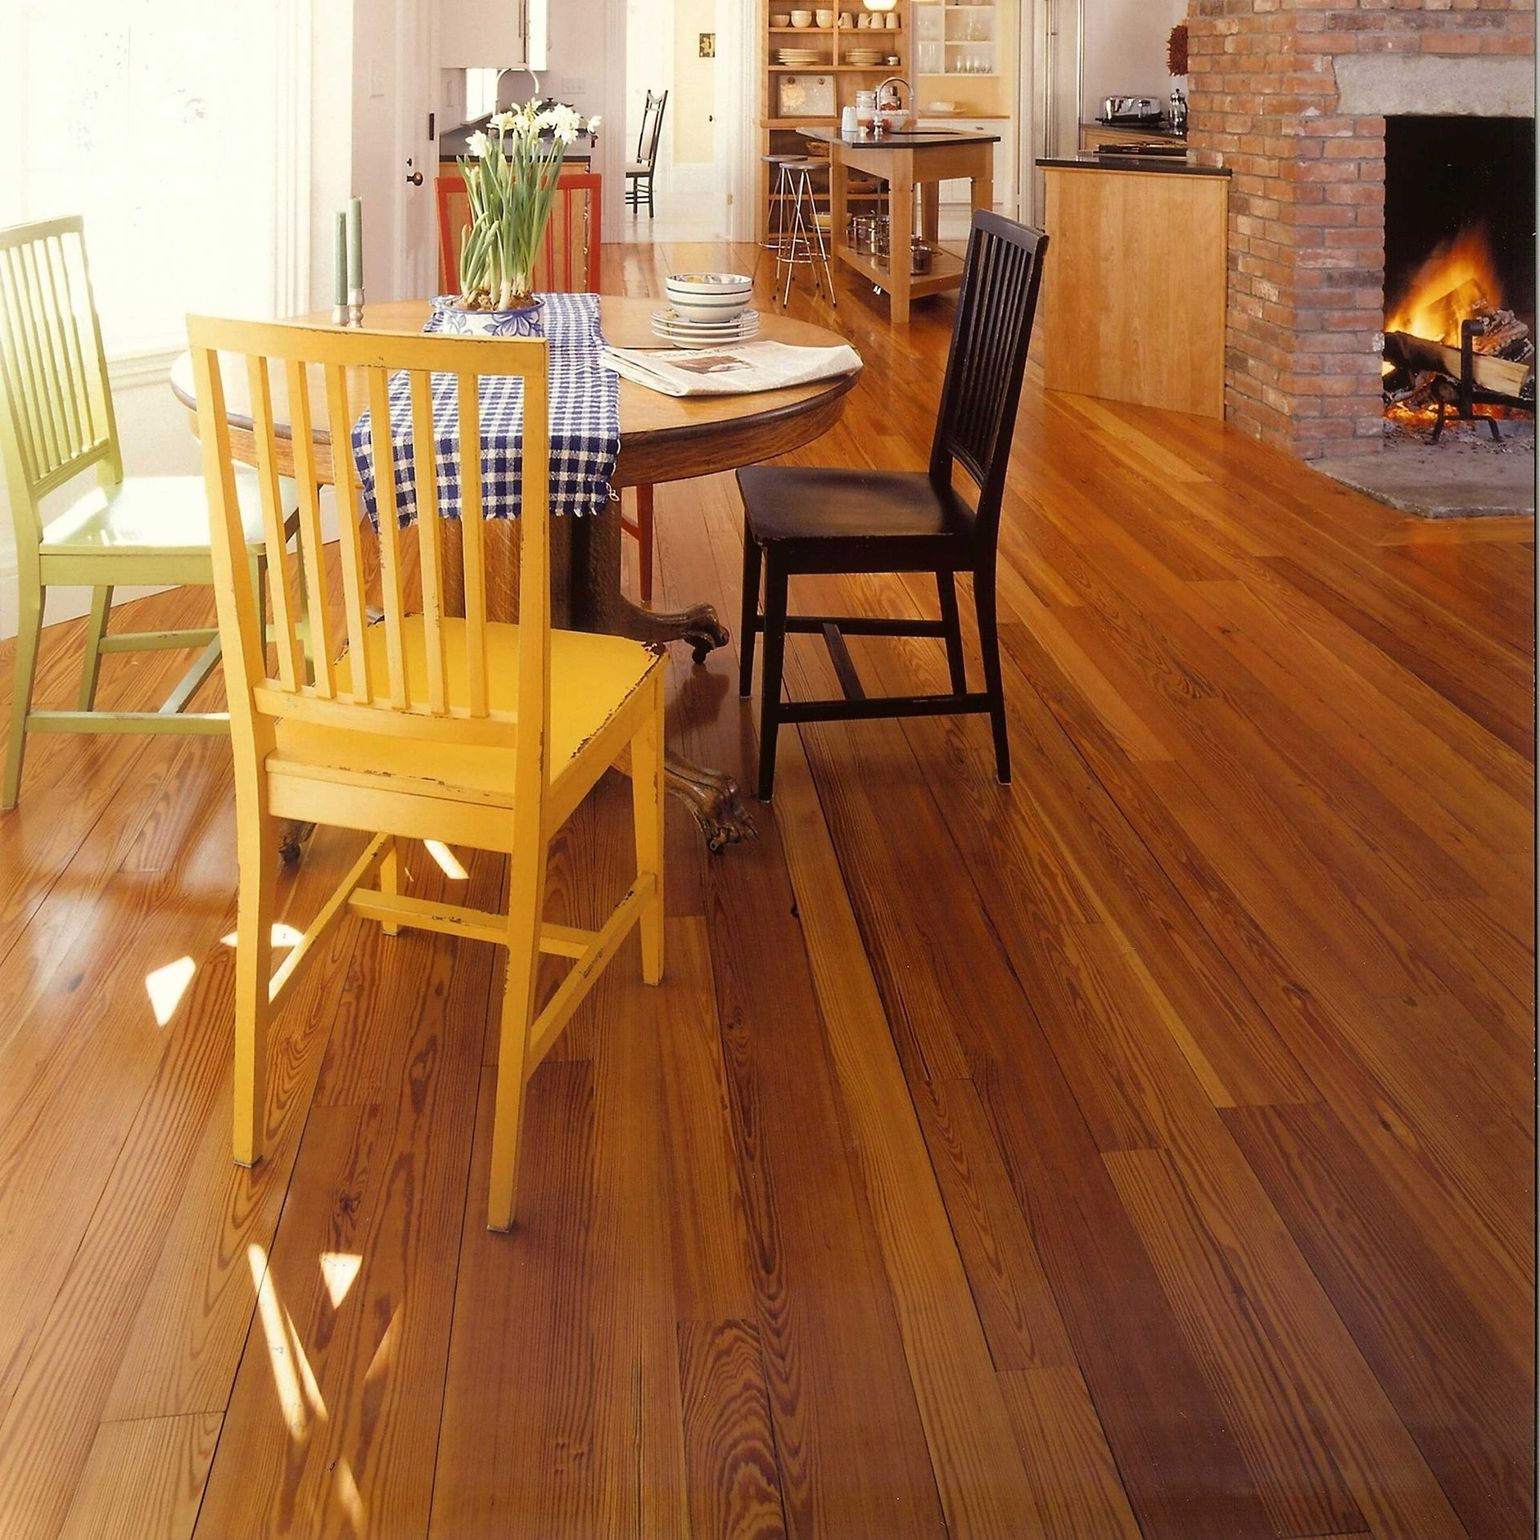 dining area with wood flooring